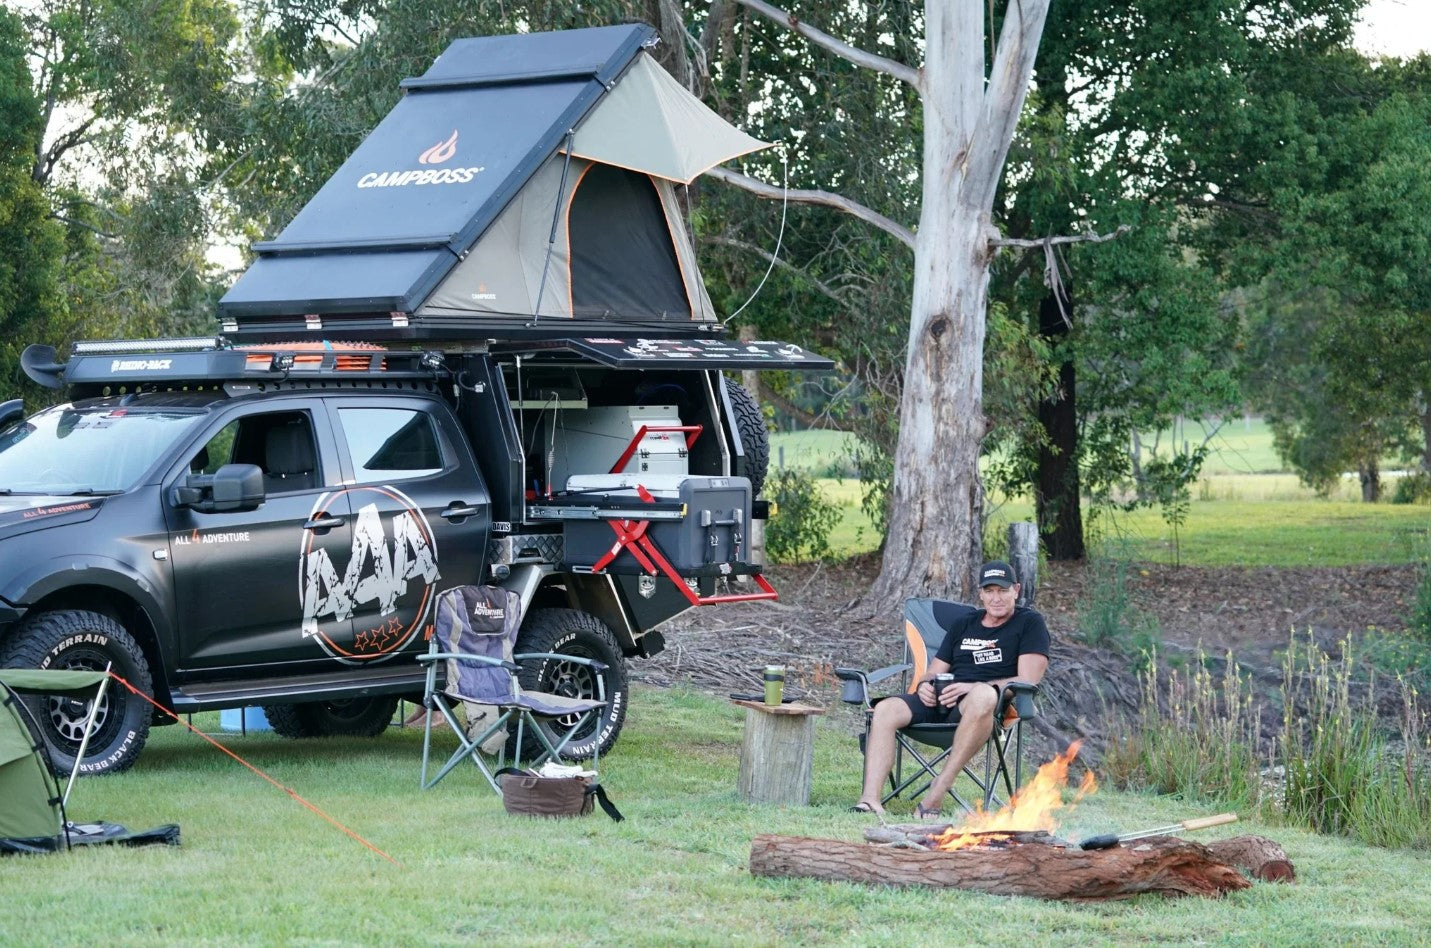 Man enjoying his camping space with his 4x4 and a Campboss rigid aluminium roof tent